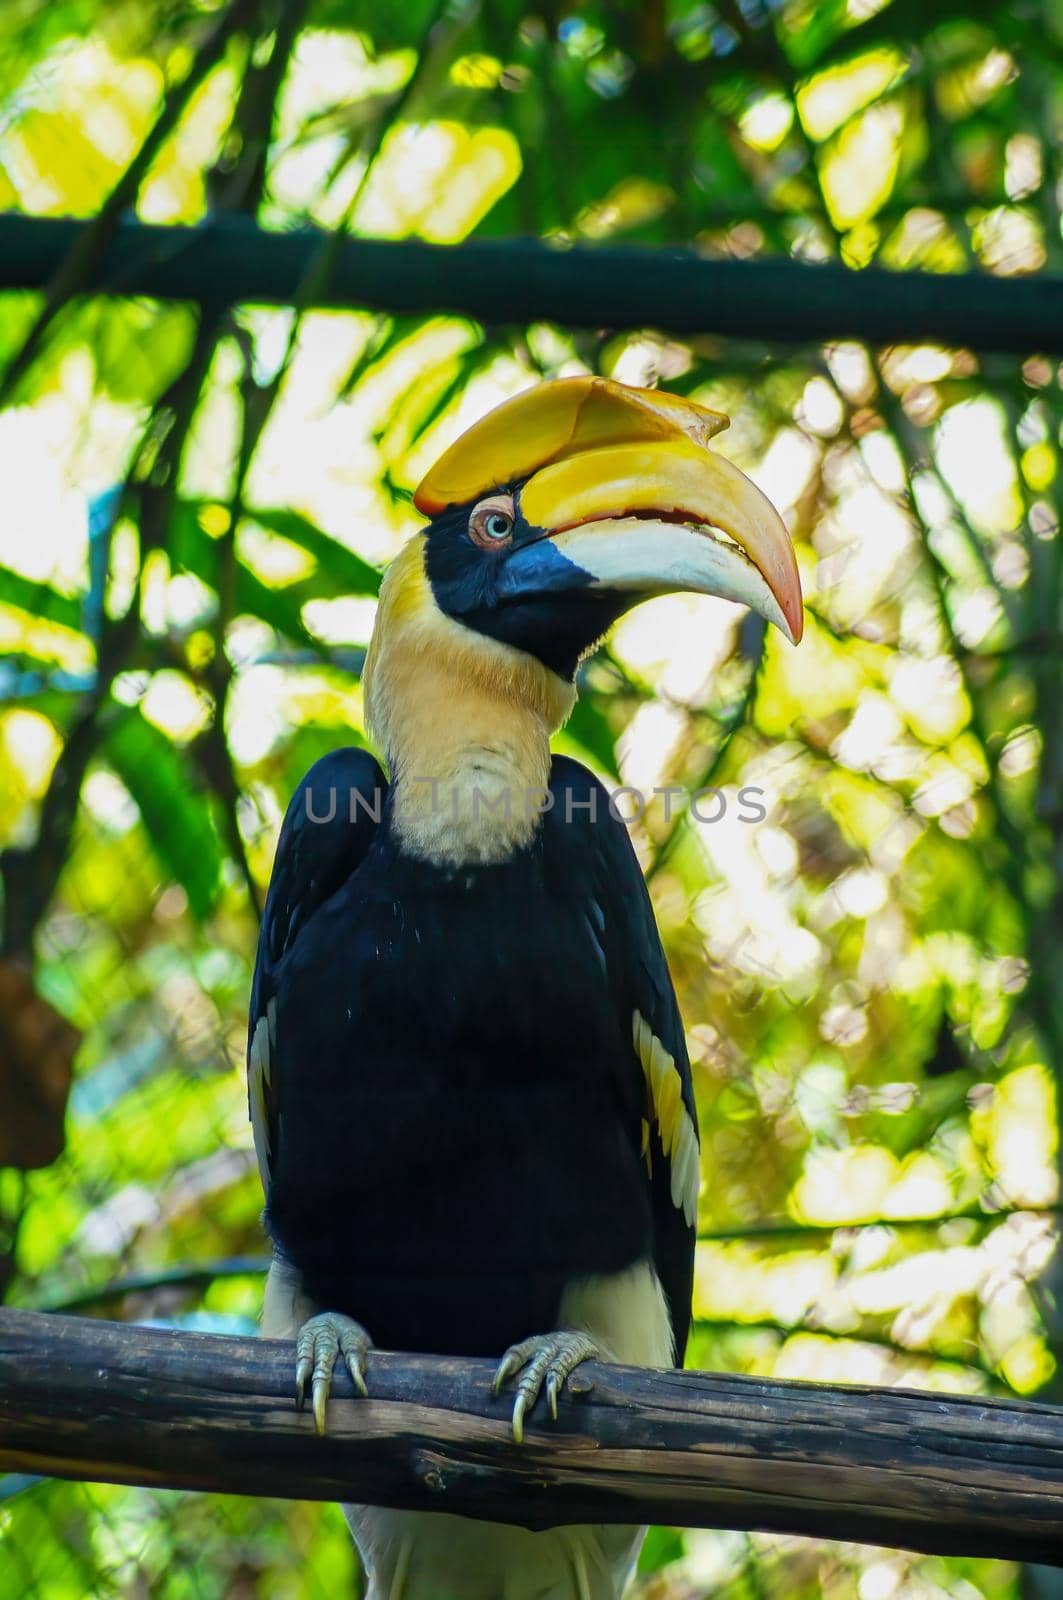 Hornbill is the black body and yellow neck, it Sticking on the timber and looking something